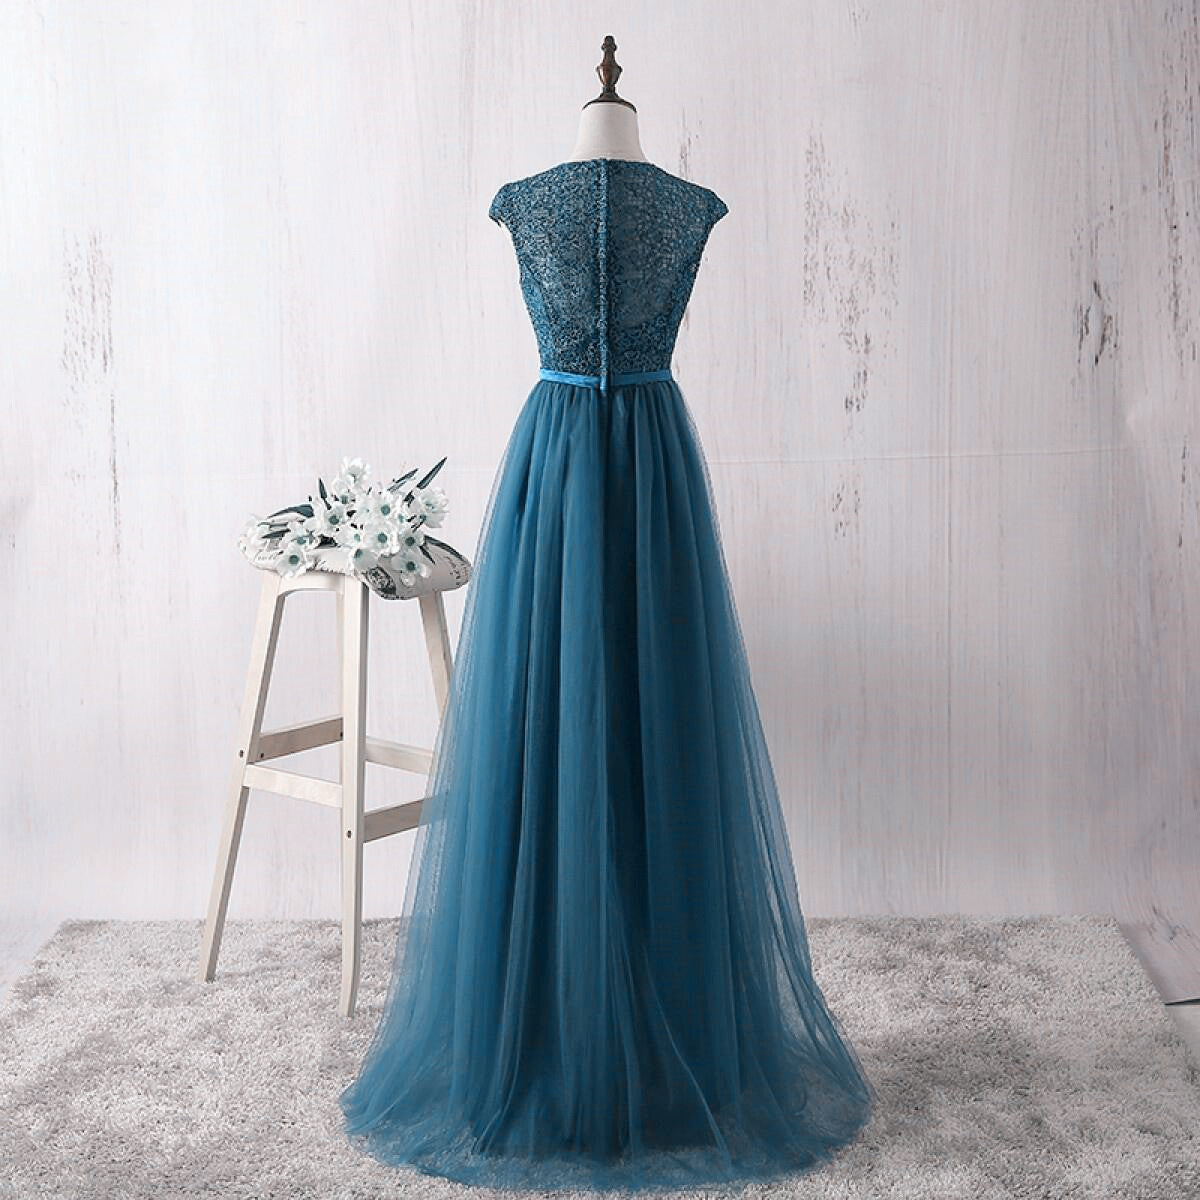 Simple Teal Blue Lace and Tulle Bridesmaid Dresss, Long Prom Dress, Party Dress